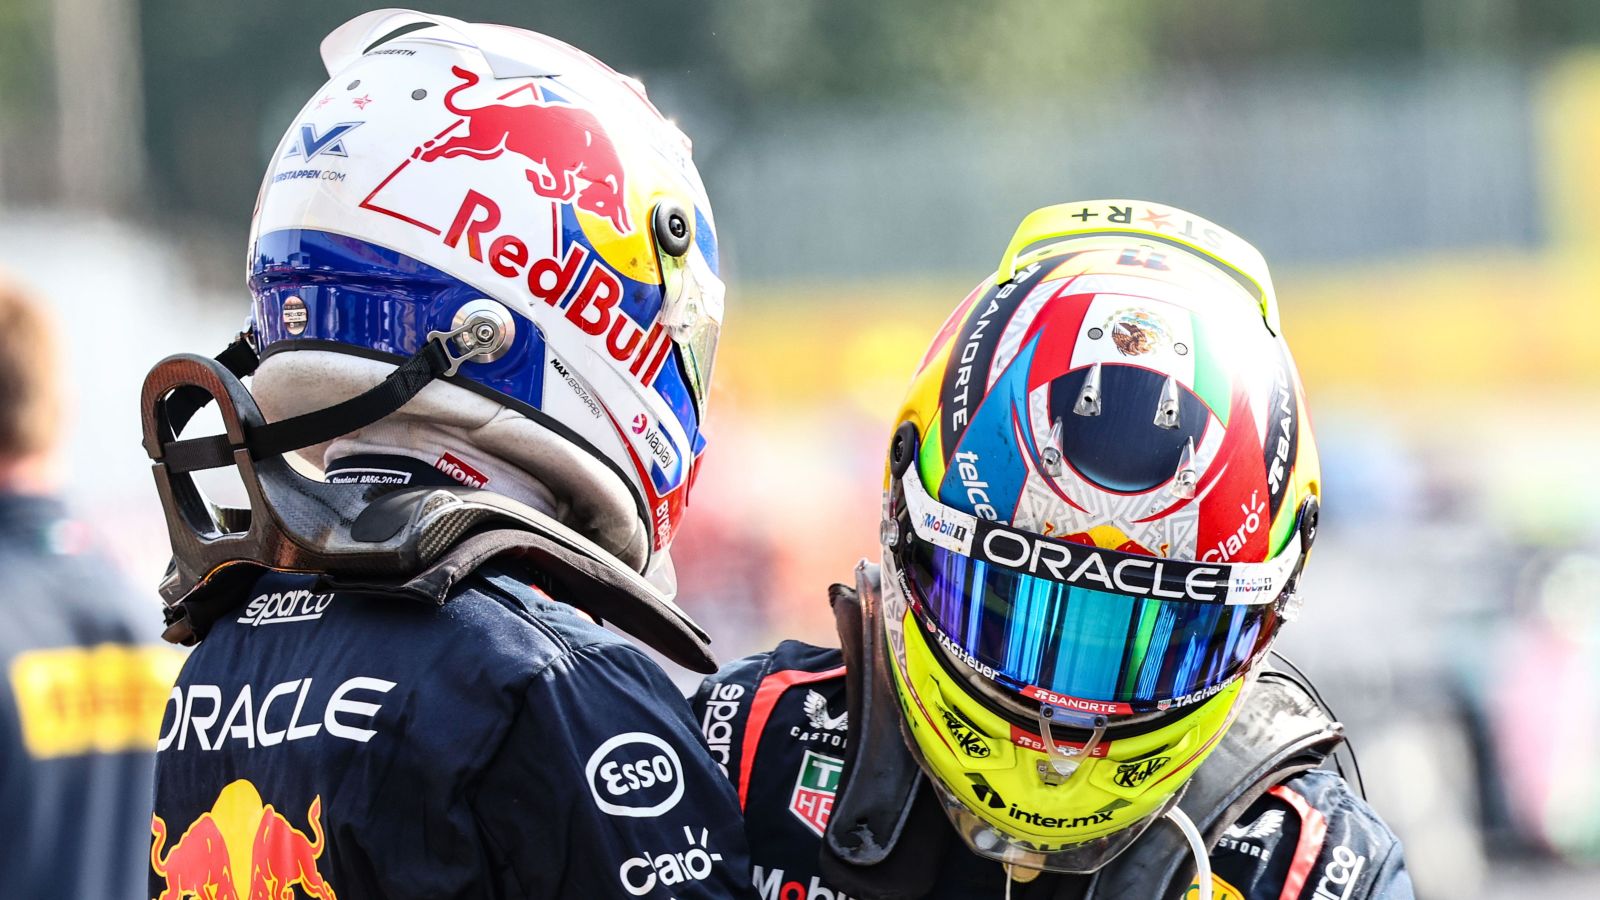 Max Verstappen and Sergio Perez embrace after securing a Red Bull one-two finish at the Italian Grand Prix at Monza.